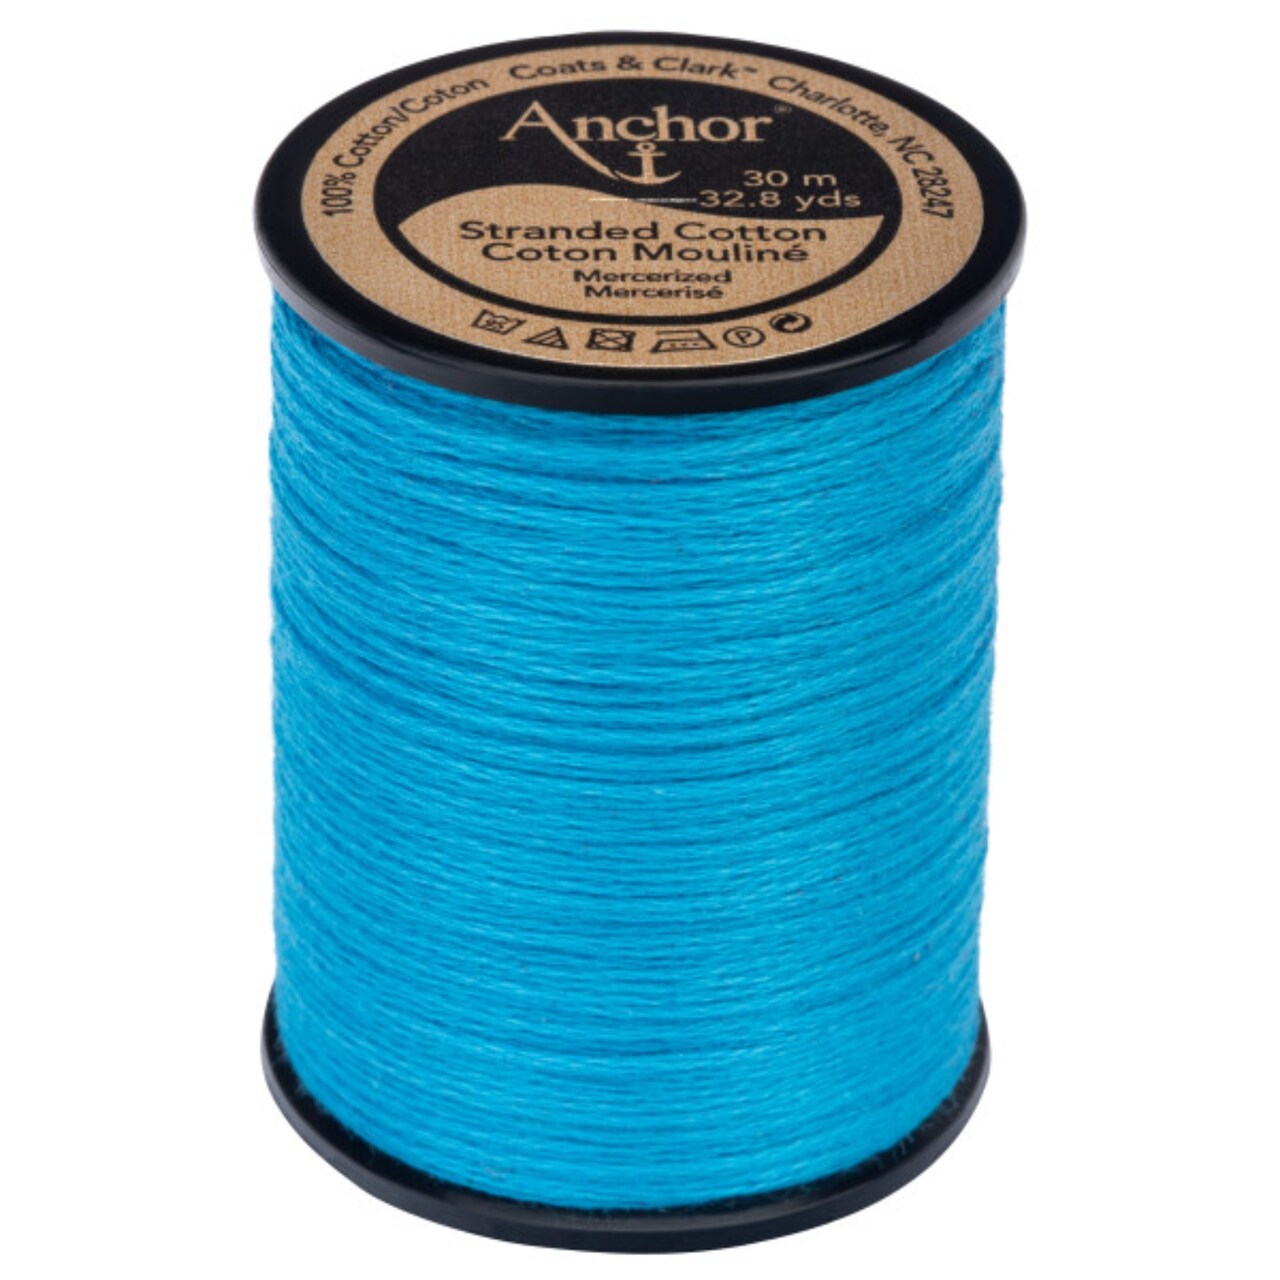 Betsy Trotwood Portal Behov for Anchor 6-Strand Embroidery Floss Spool 32.8Yd-Ice Blue | Michaels